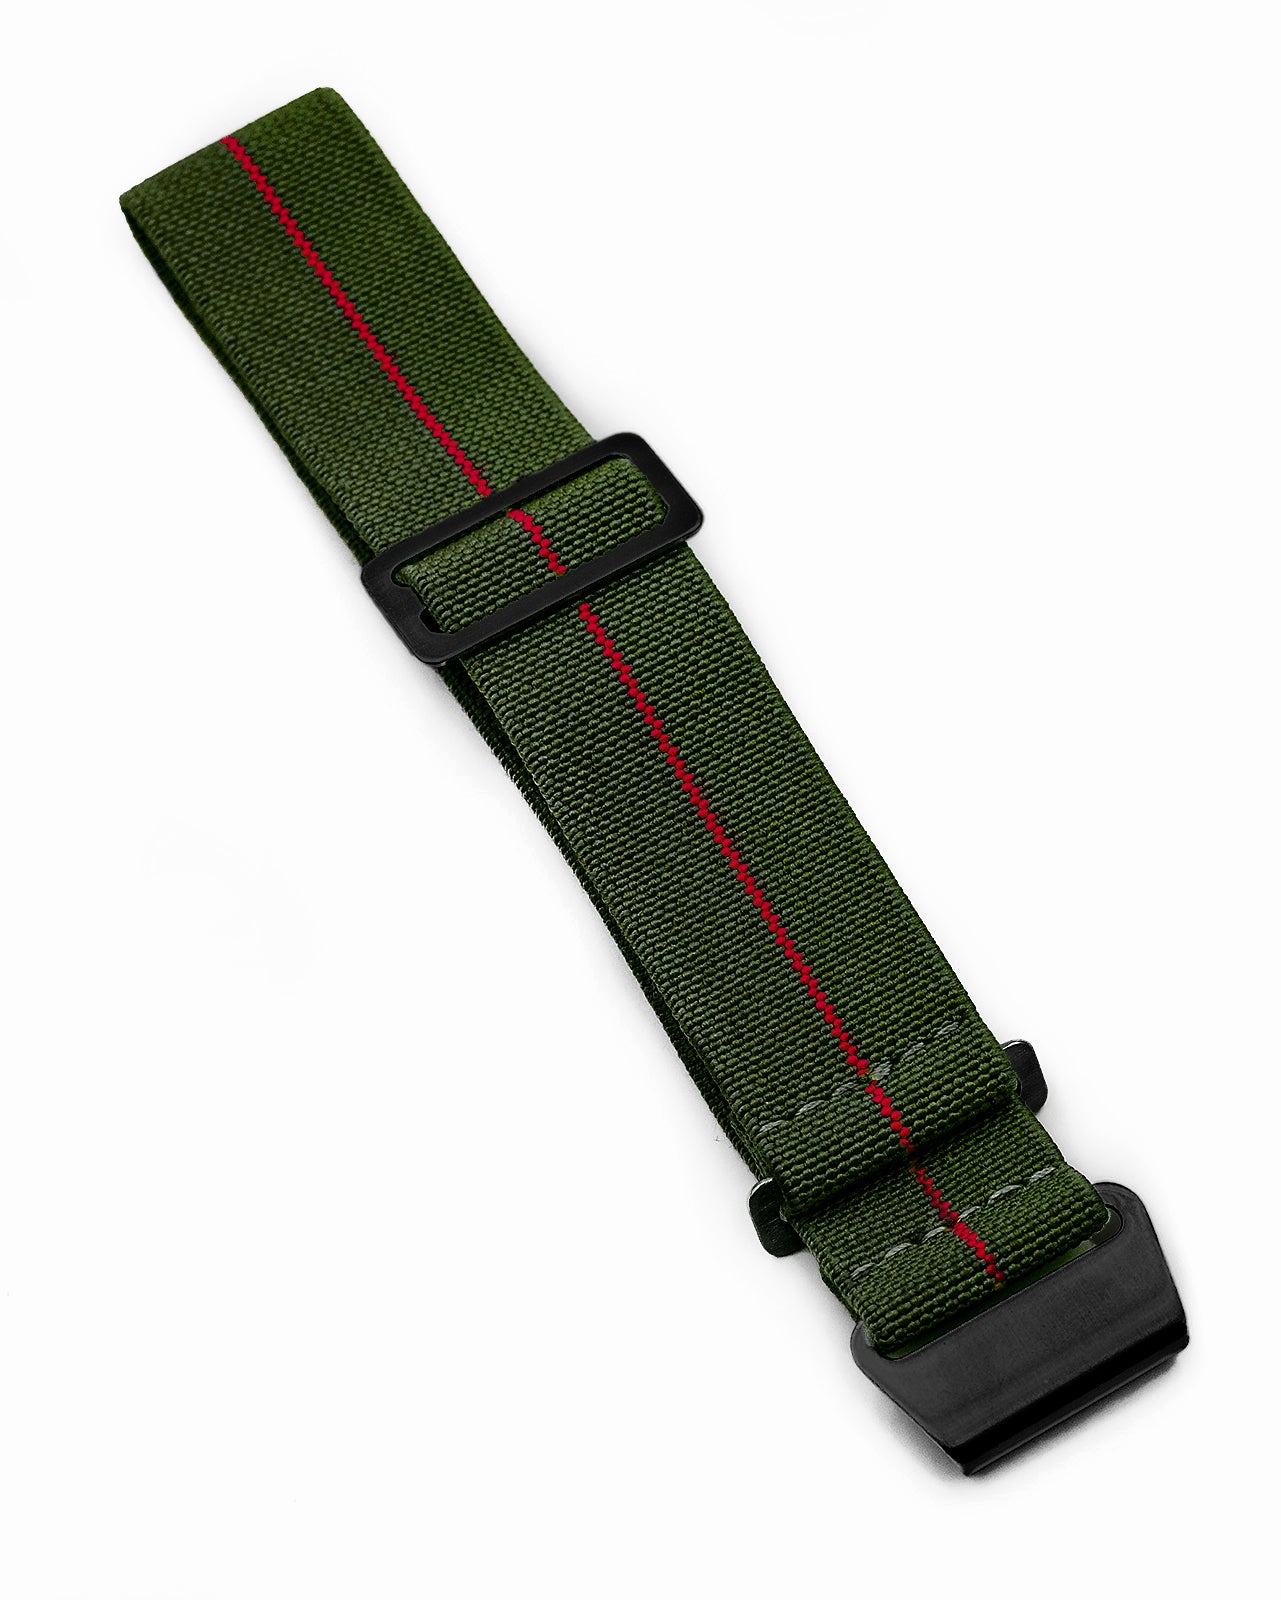 PARA Elastic (Stealth) - Olive Green with Red Centerline